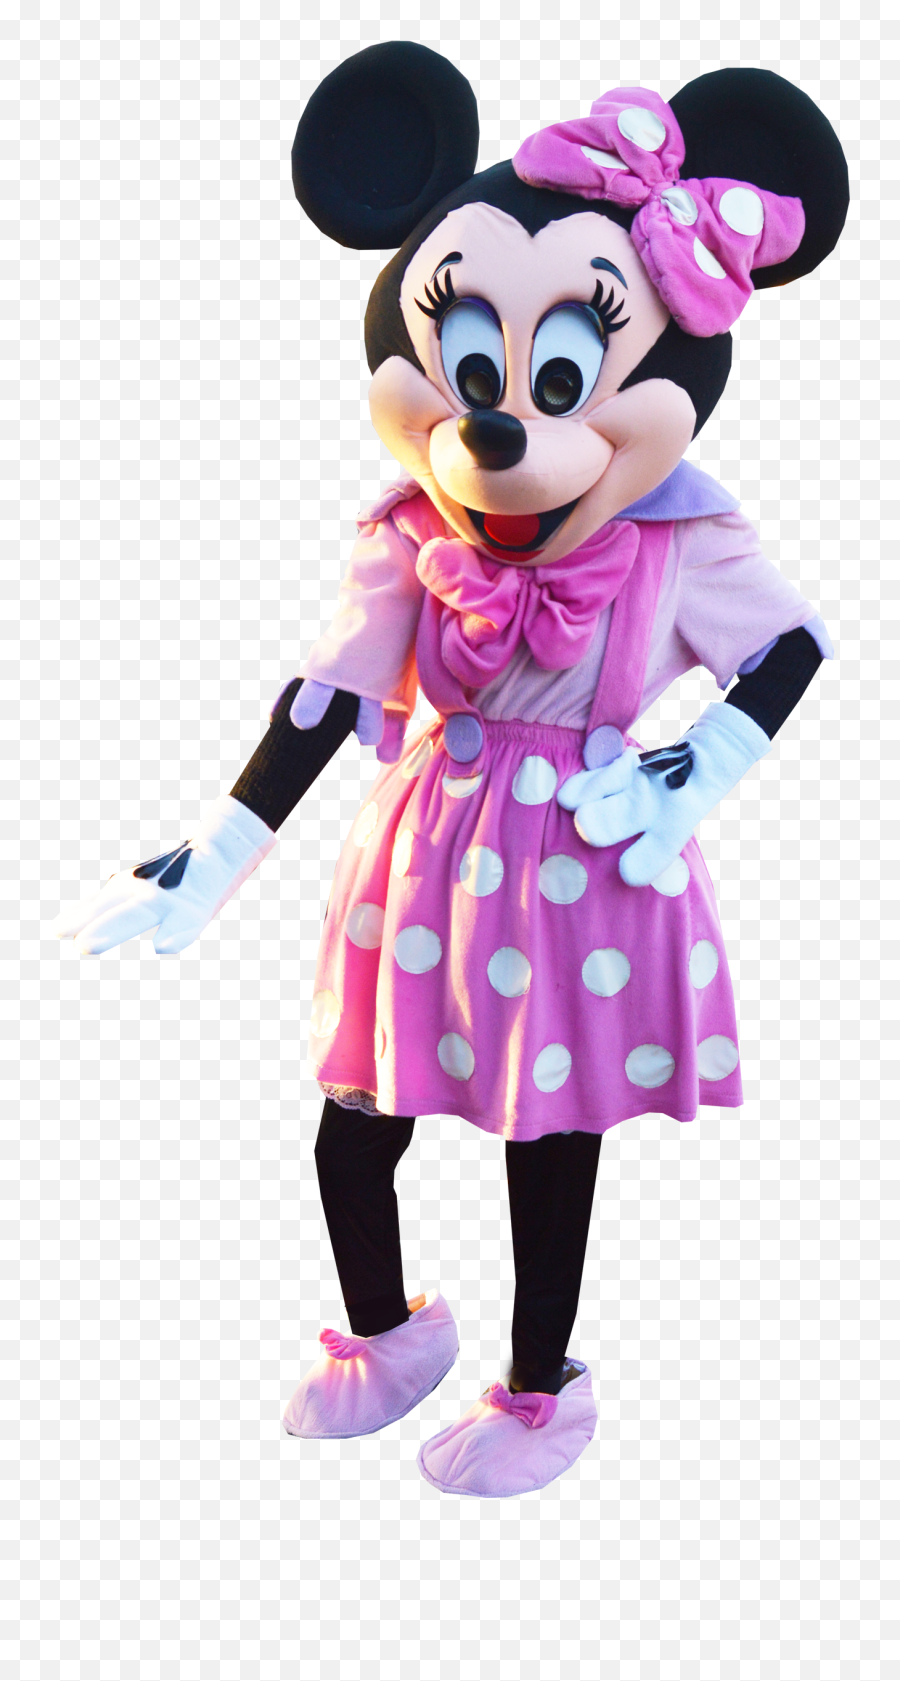 Download Minnie Mouse - Mascot Full Size Png Image Pngkit Mascot,Minnie Mouse Transparent Background